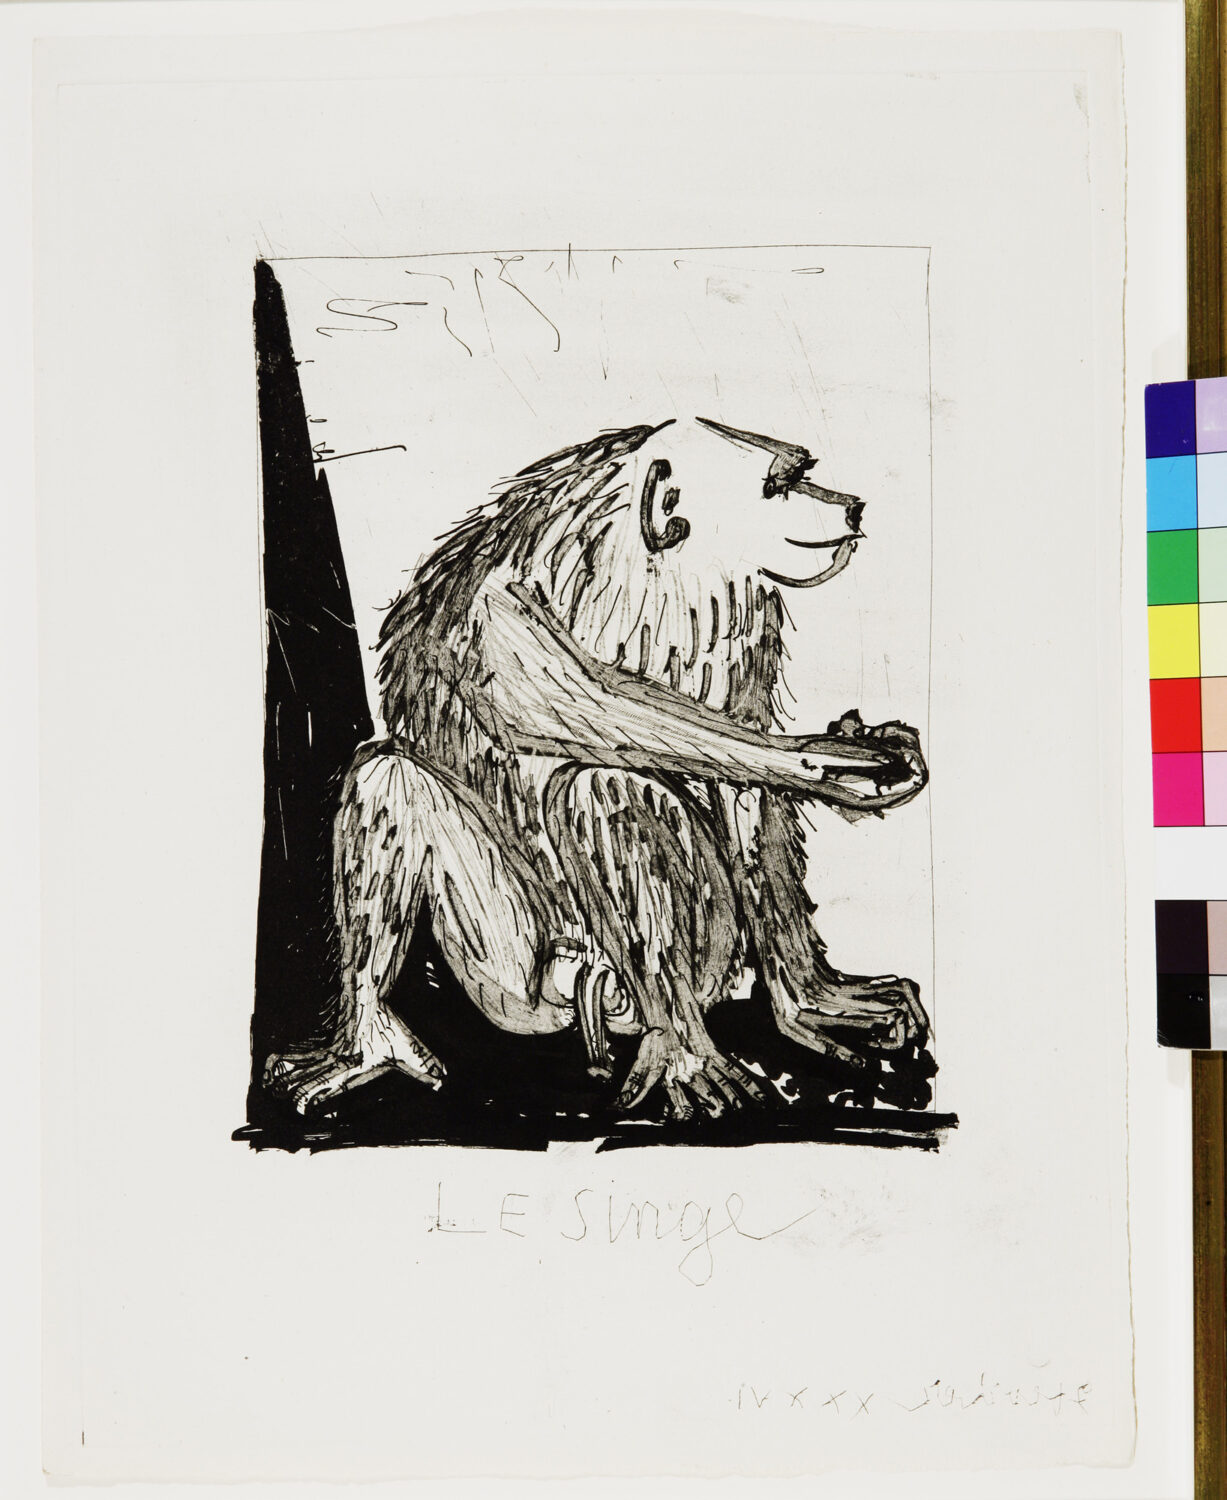 thumbnail of Auqatint and Drypoint by Pablo Picasso titled Le Singe.